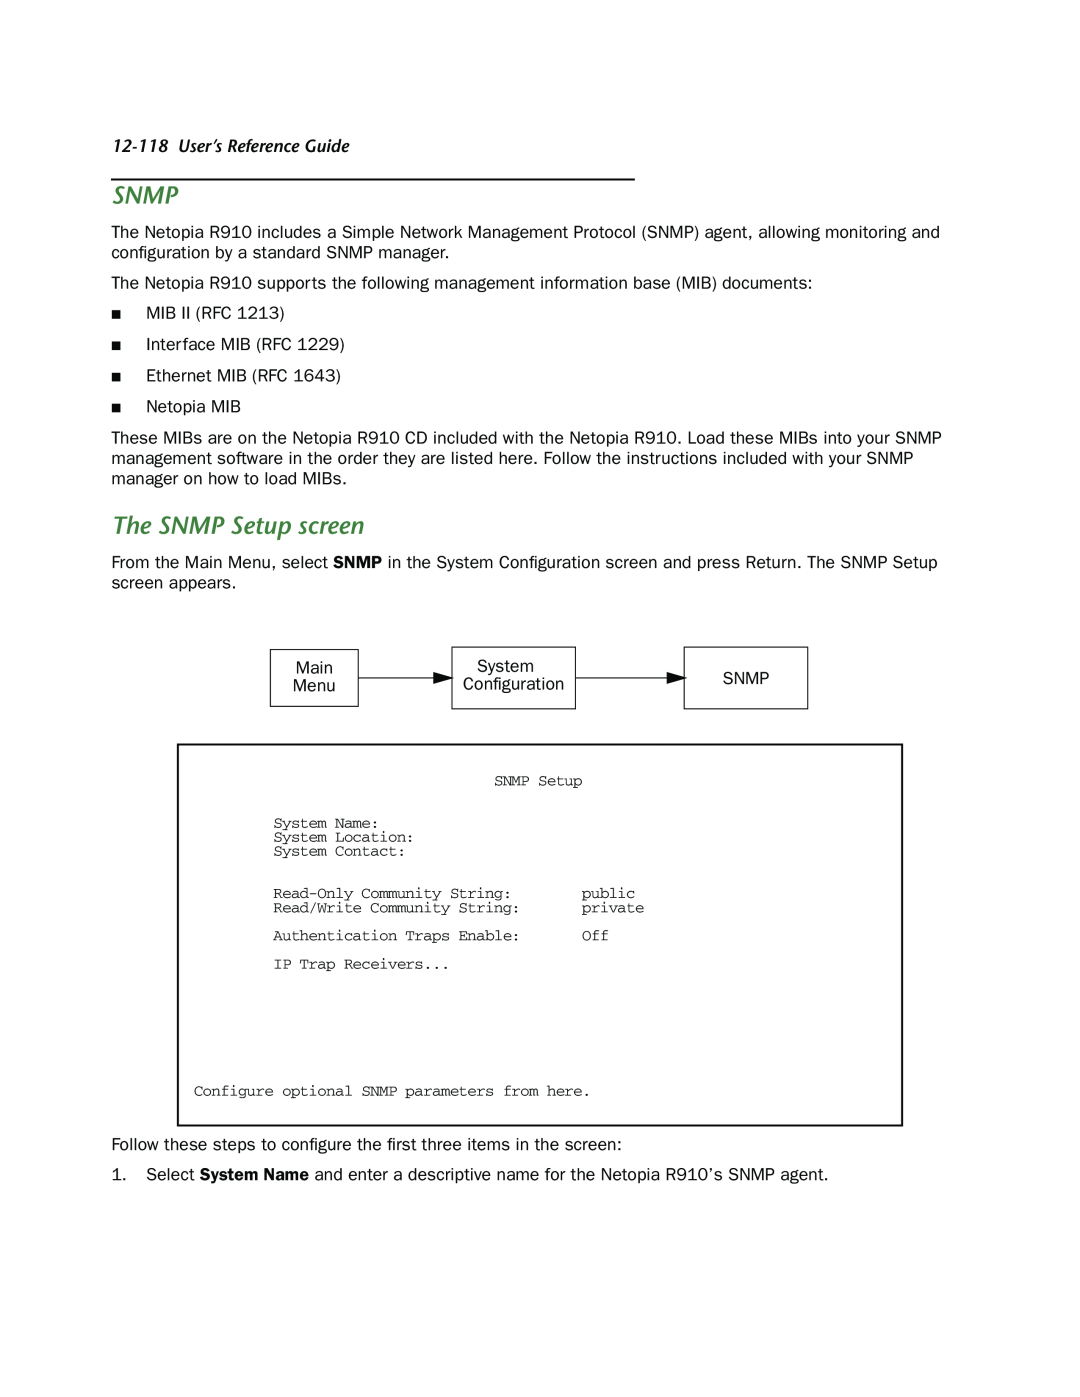 Netopia R910 manual Snmp, The SNMP Setup screen, User’s Reference Guide 